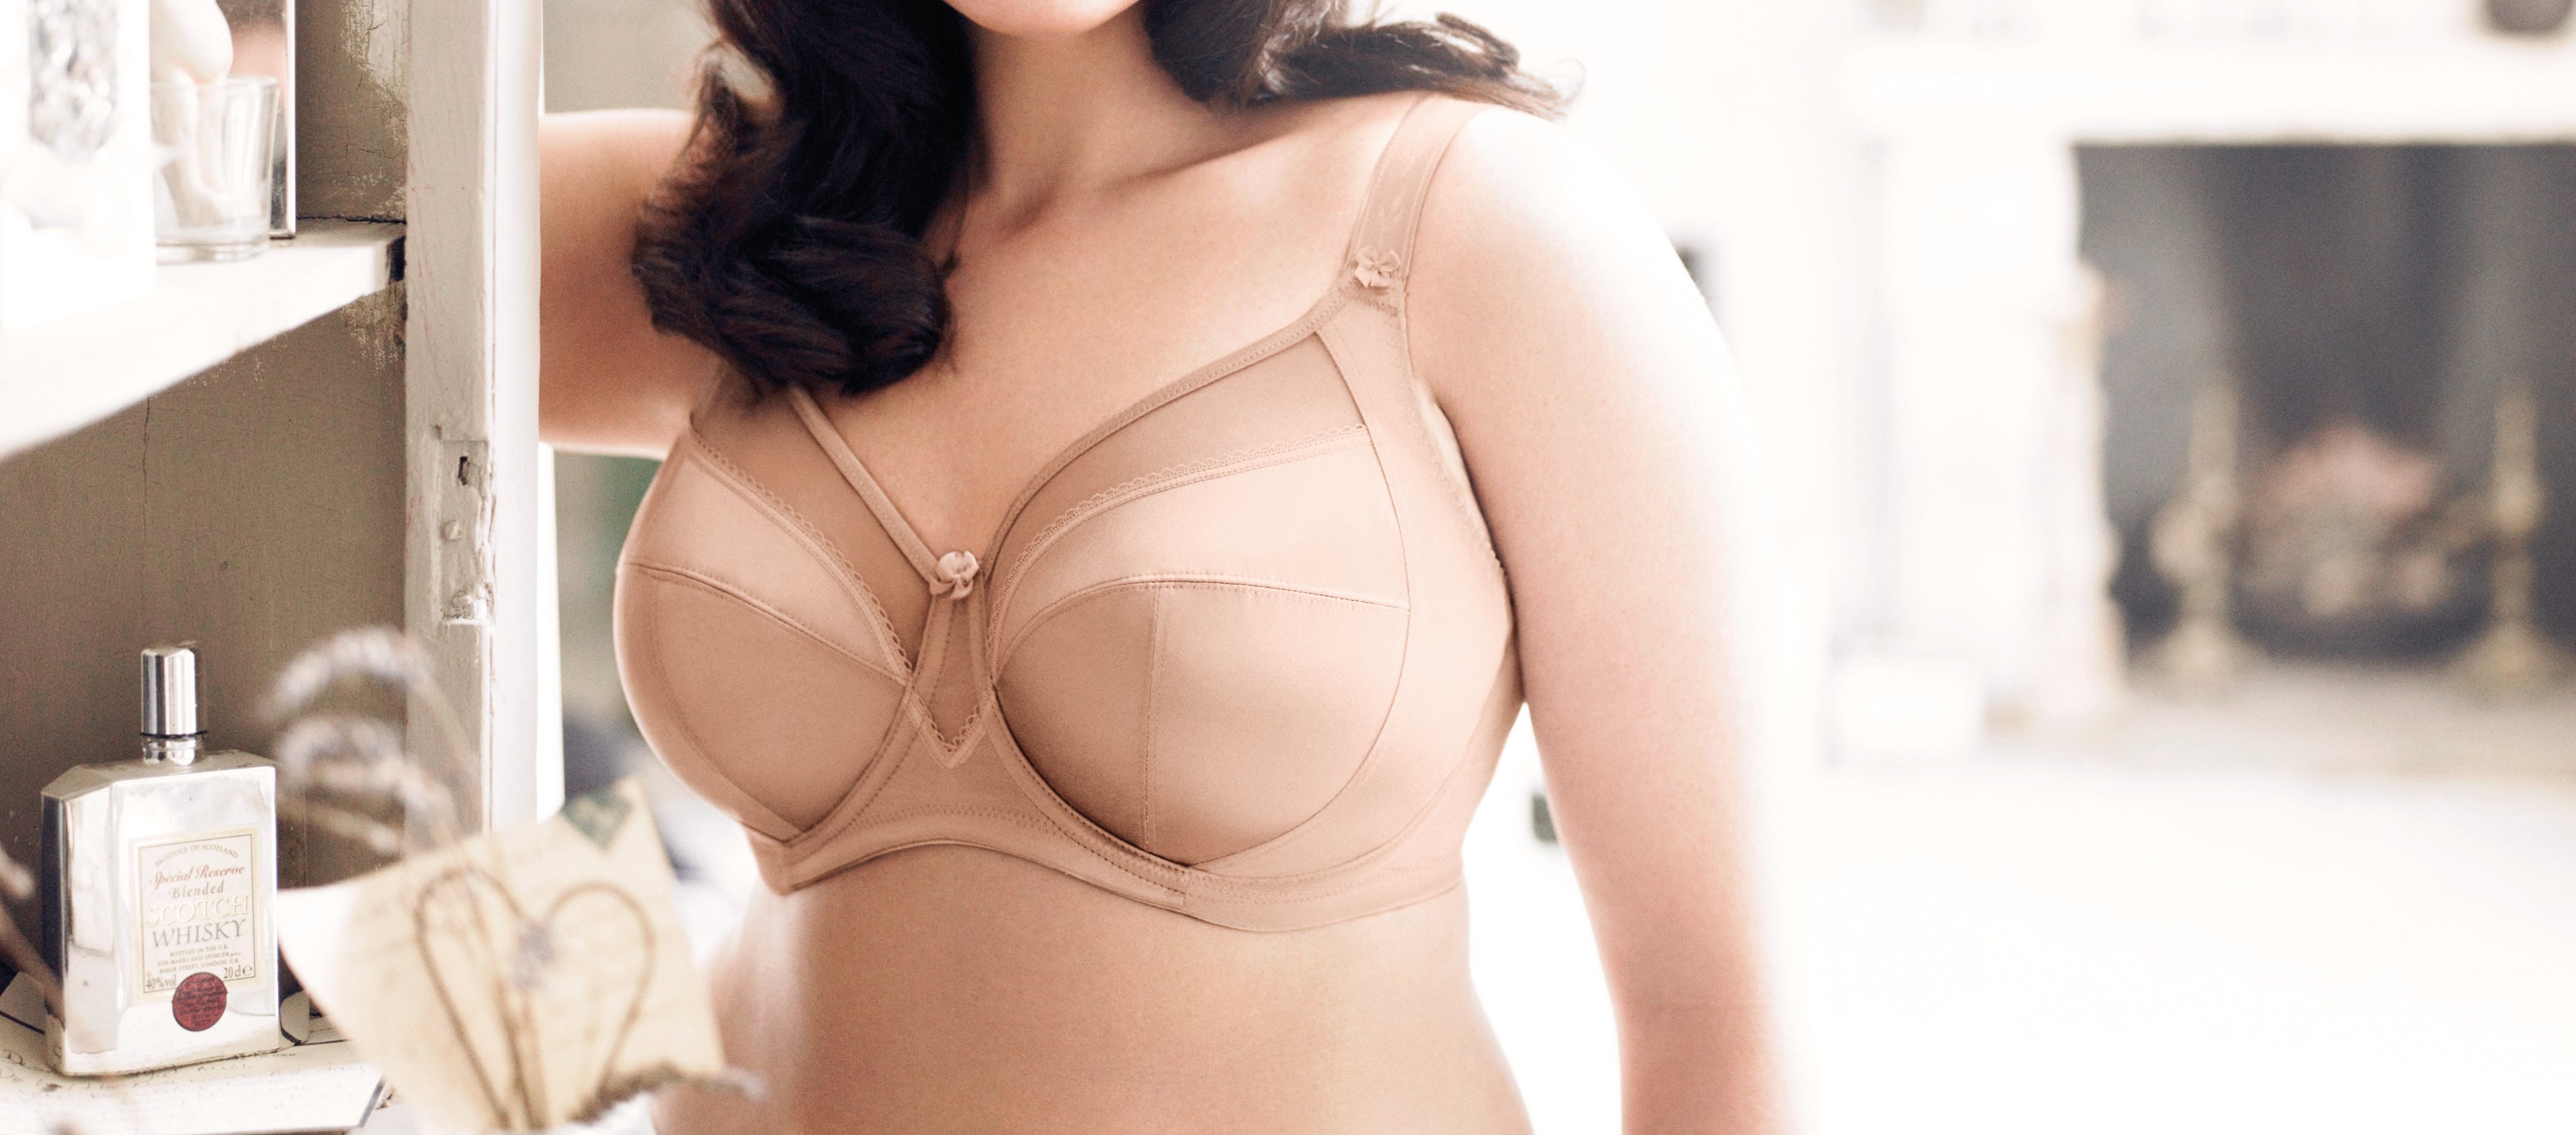 Keira Fawn Soft Cup Bra from Goddess